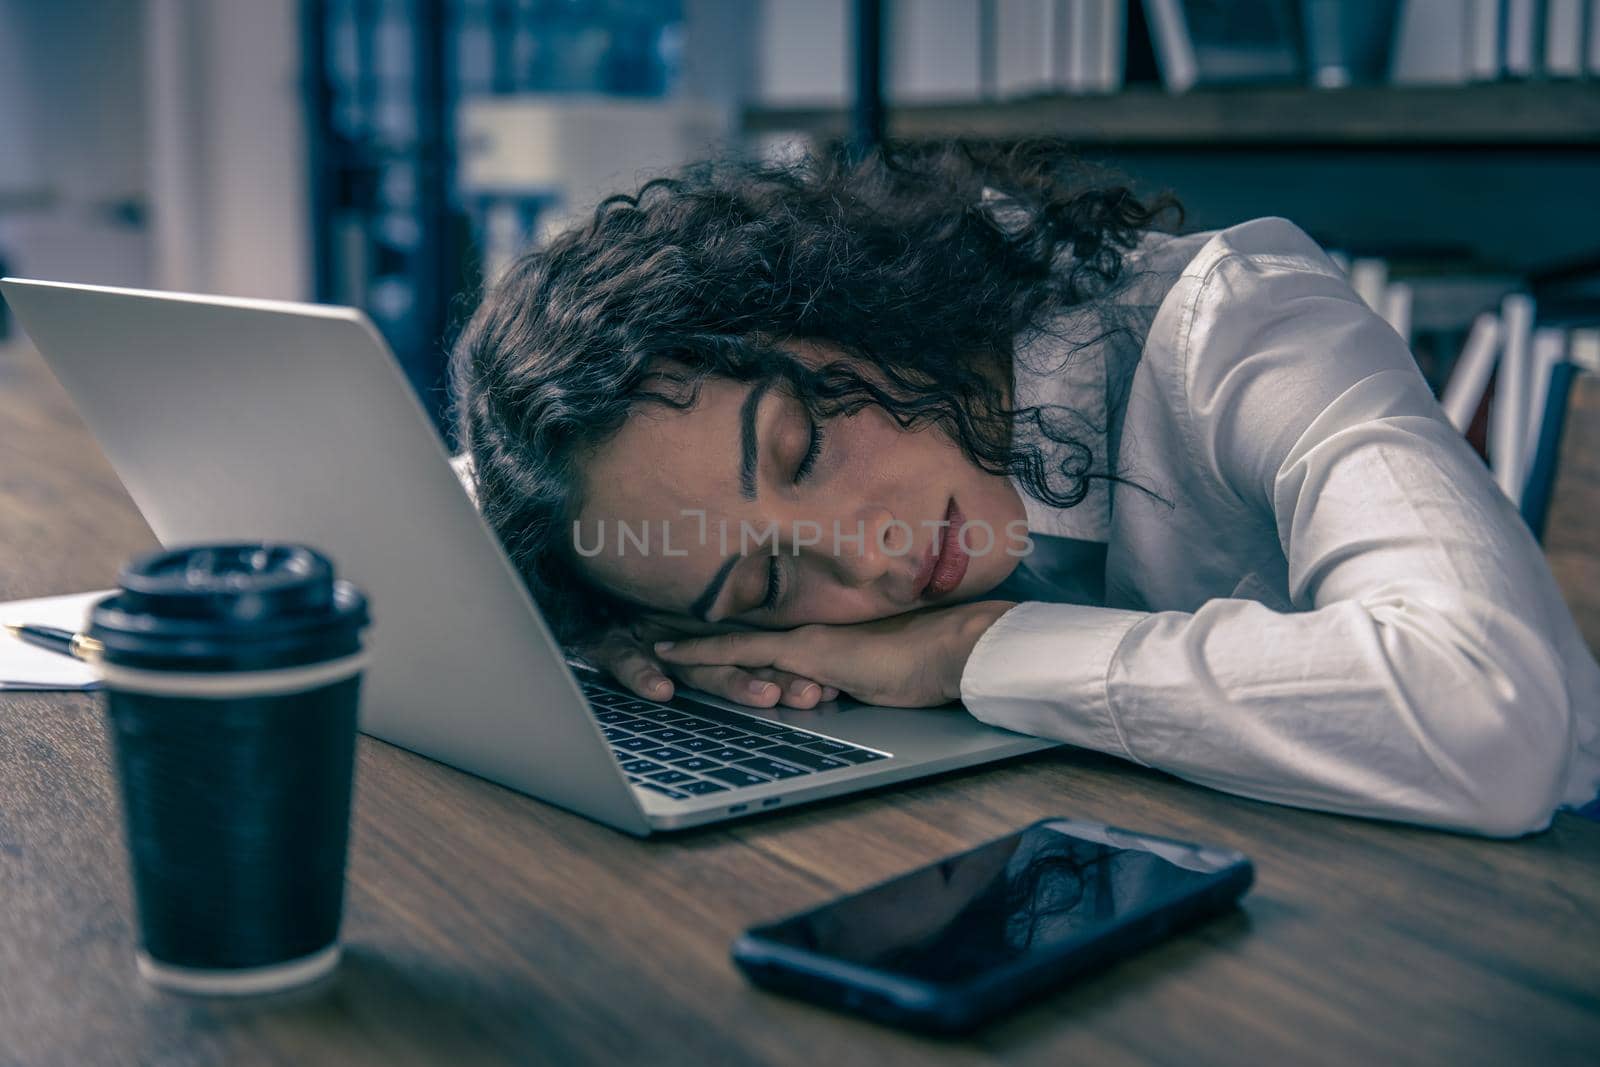 Tired working women sleeping at office desk hard work overnight nap. African American black businesswomen employee worked late and fell asleep on the computer laptop table at night with coffee cup.